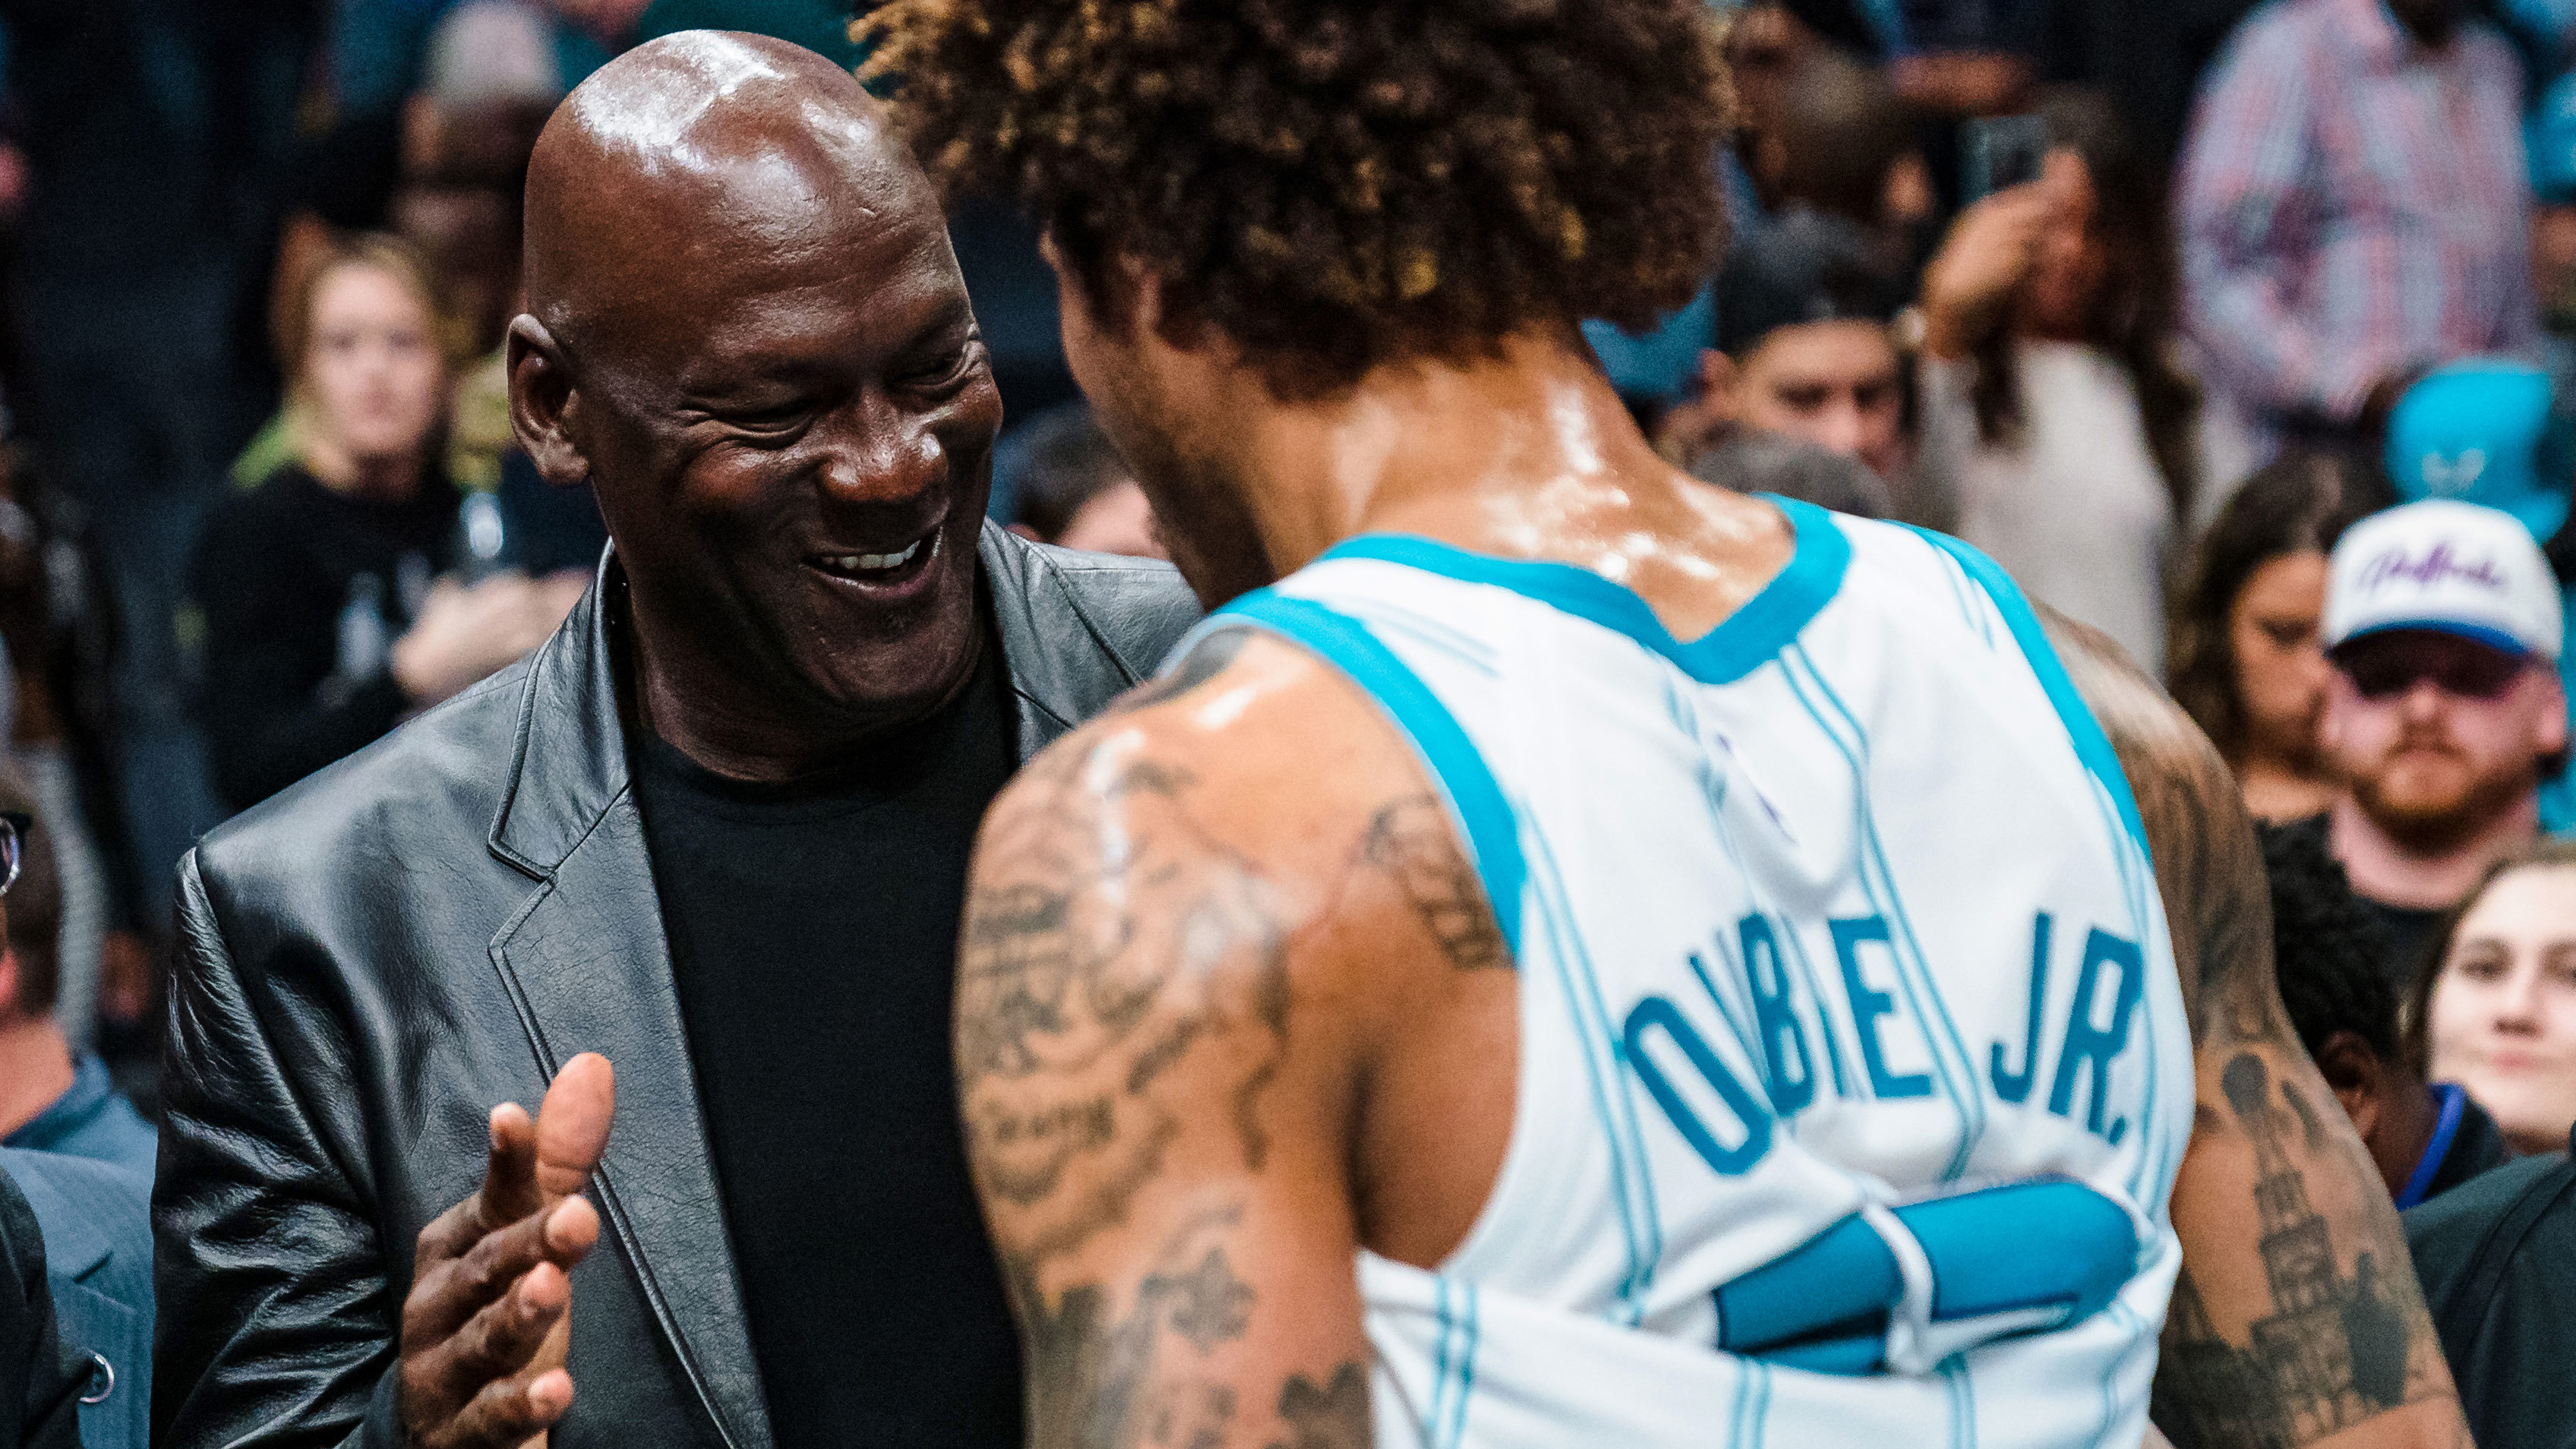 Michael Jordan explains why he stopped going to church - Basketball Network  - Your daily dose of basketball